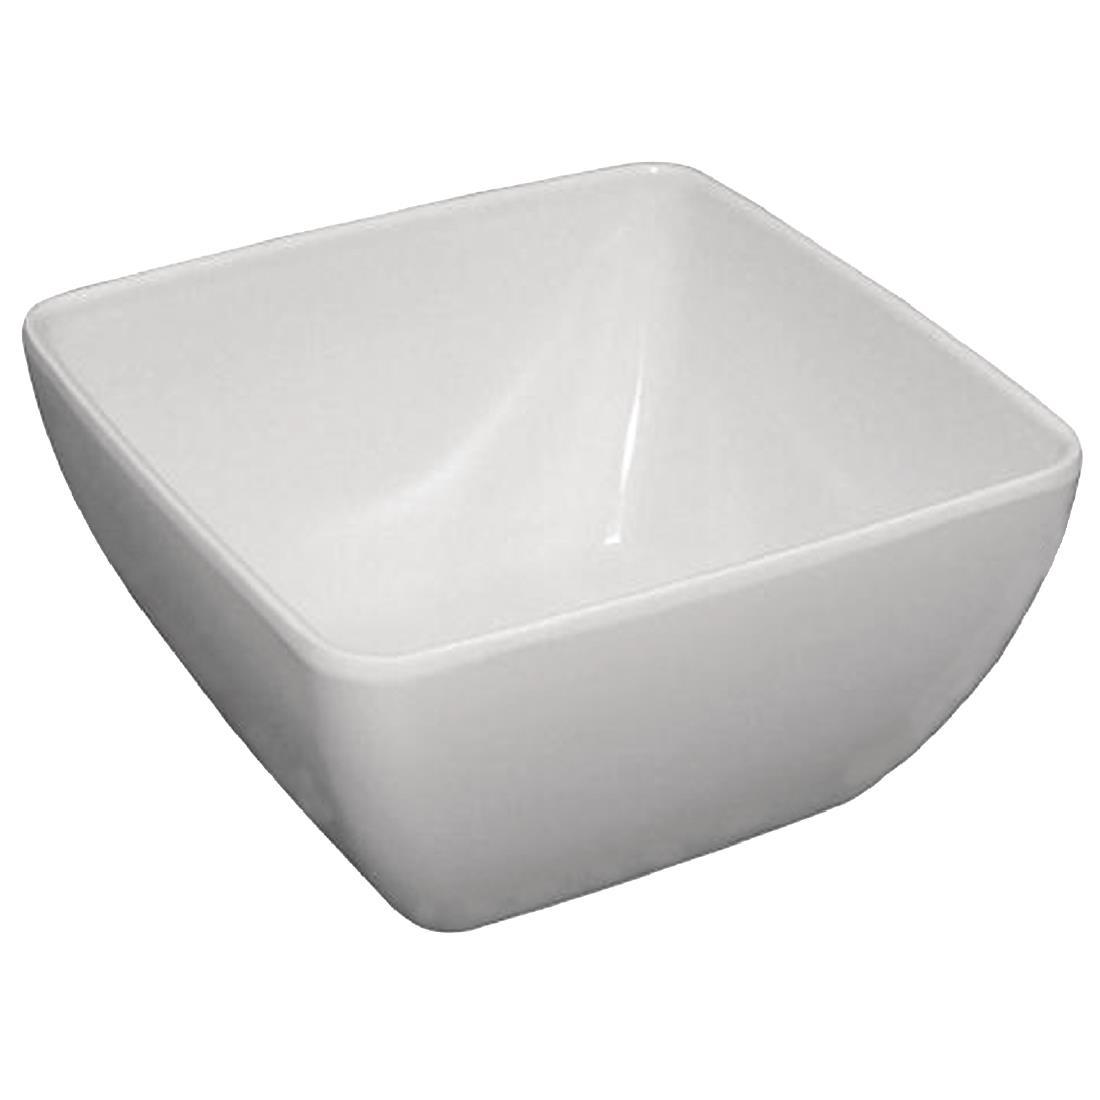 Olympia Kristallon Curved White Melamine Bowl 8in - DP144  - 1